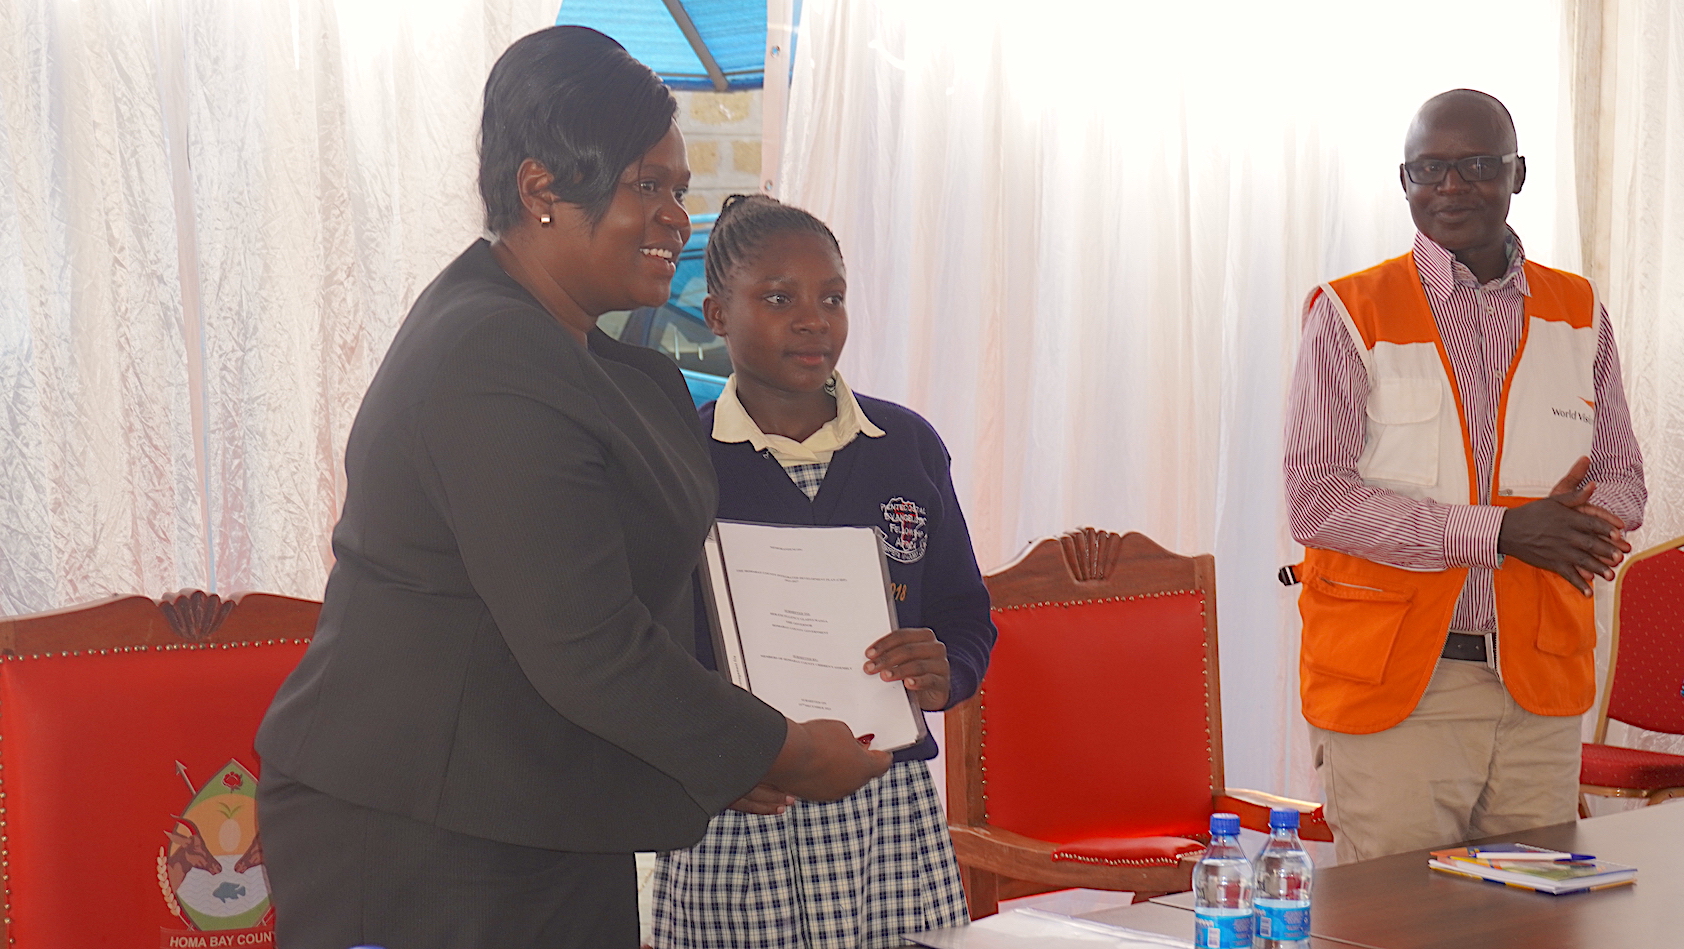 Gladys Wanga, Homa Bay County Governor receives a memorandum with issues that children would like the county to address. ©World Vision Photo/Felix Pilipili.